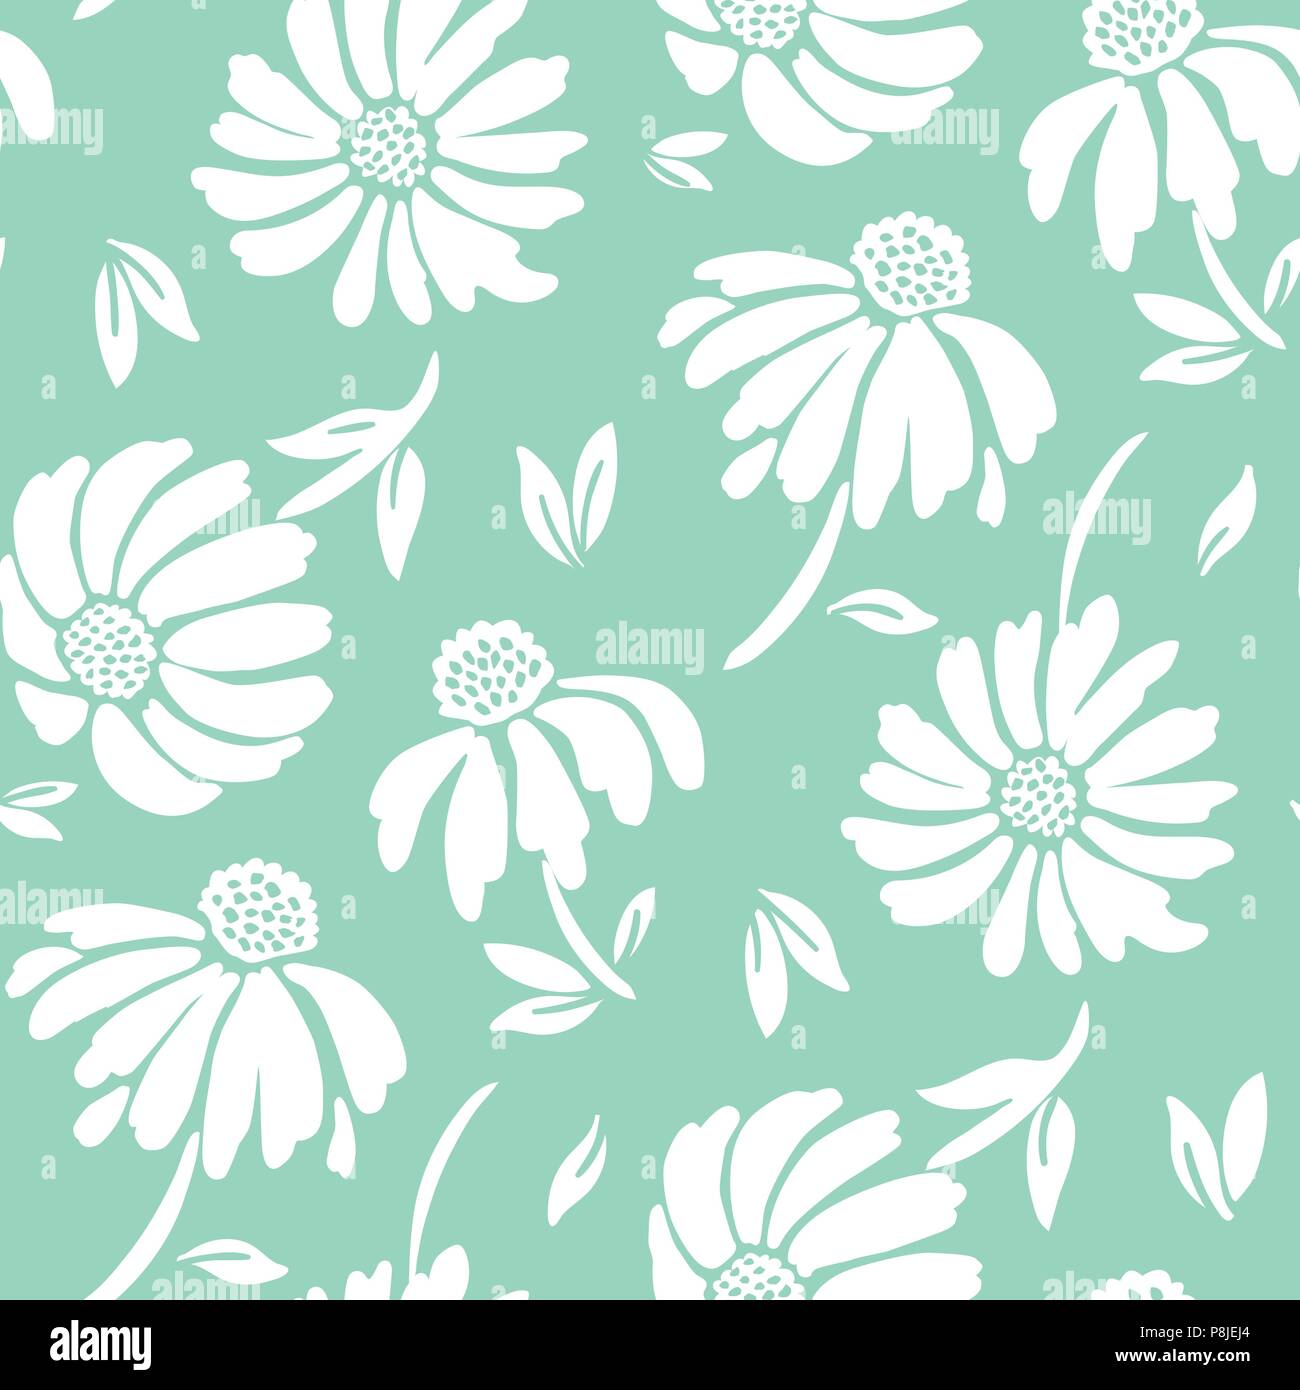 Bold graphic large scale floral vector seamless pattern